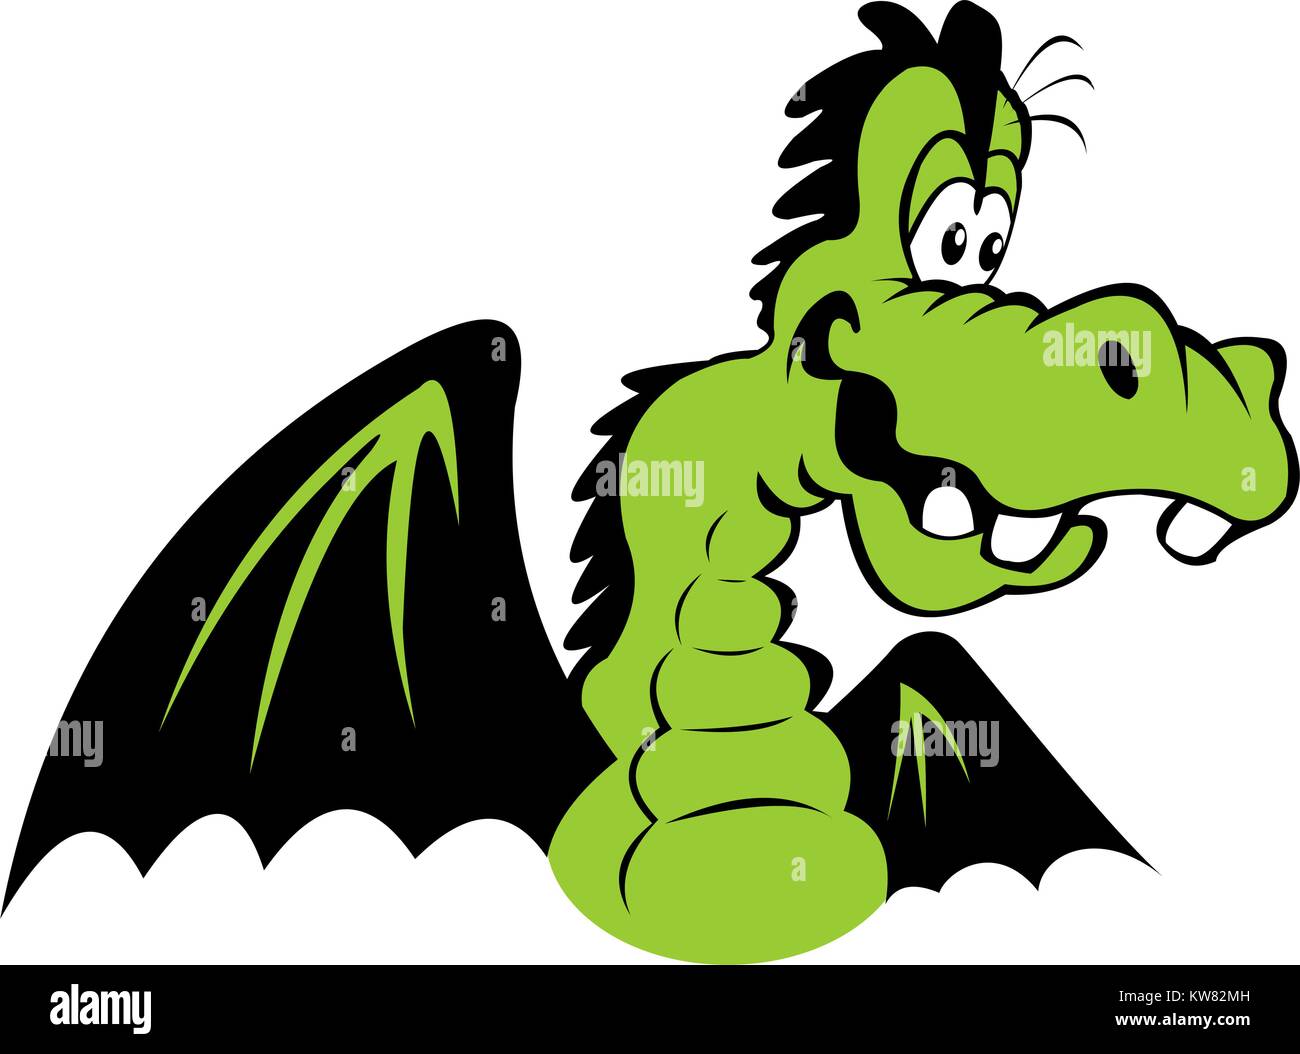 Colored illustration of a cartoon dragon. Isolated on white background. Stock Vector